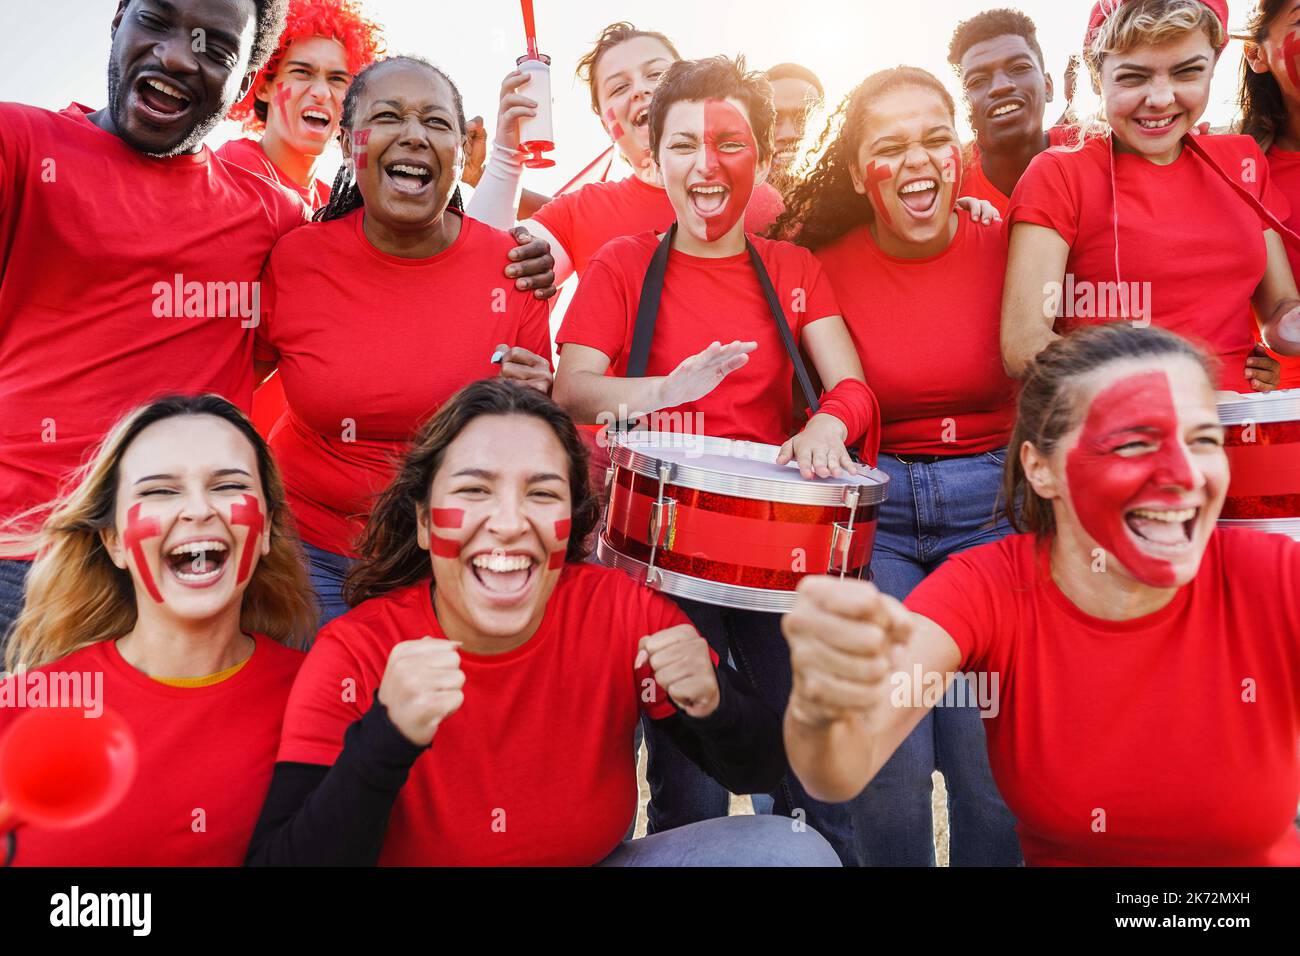 Multiracial red sport fans screaming while supporting their team - Football supporters having fun at competition event - Focus on center girl face Stock Photo